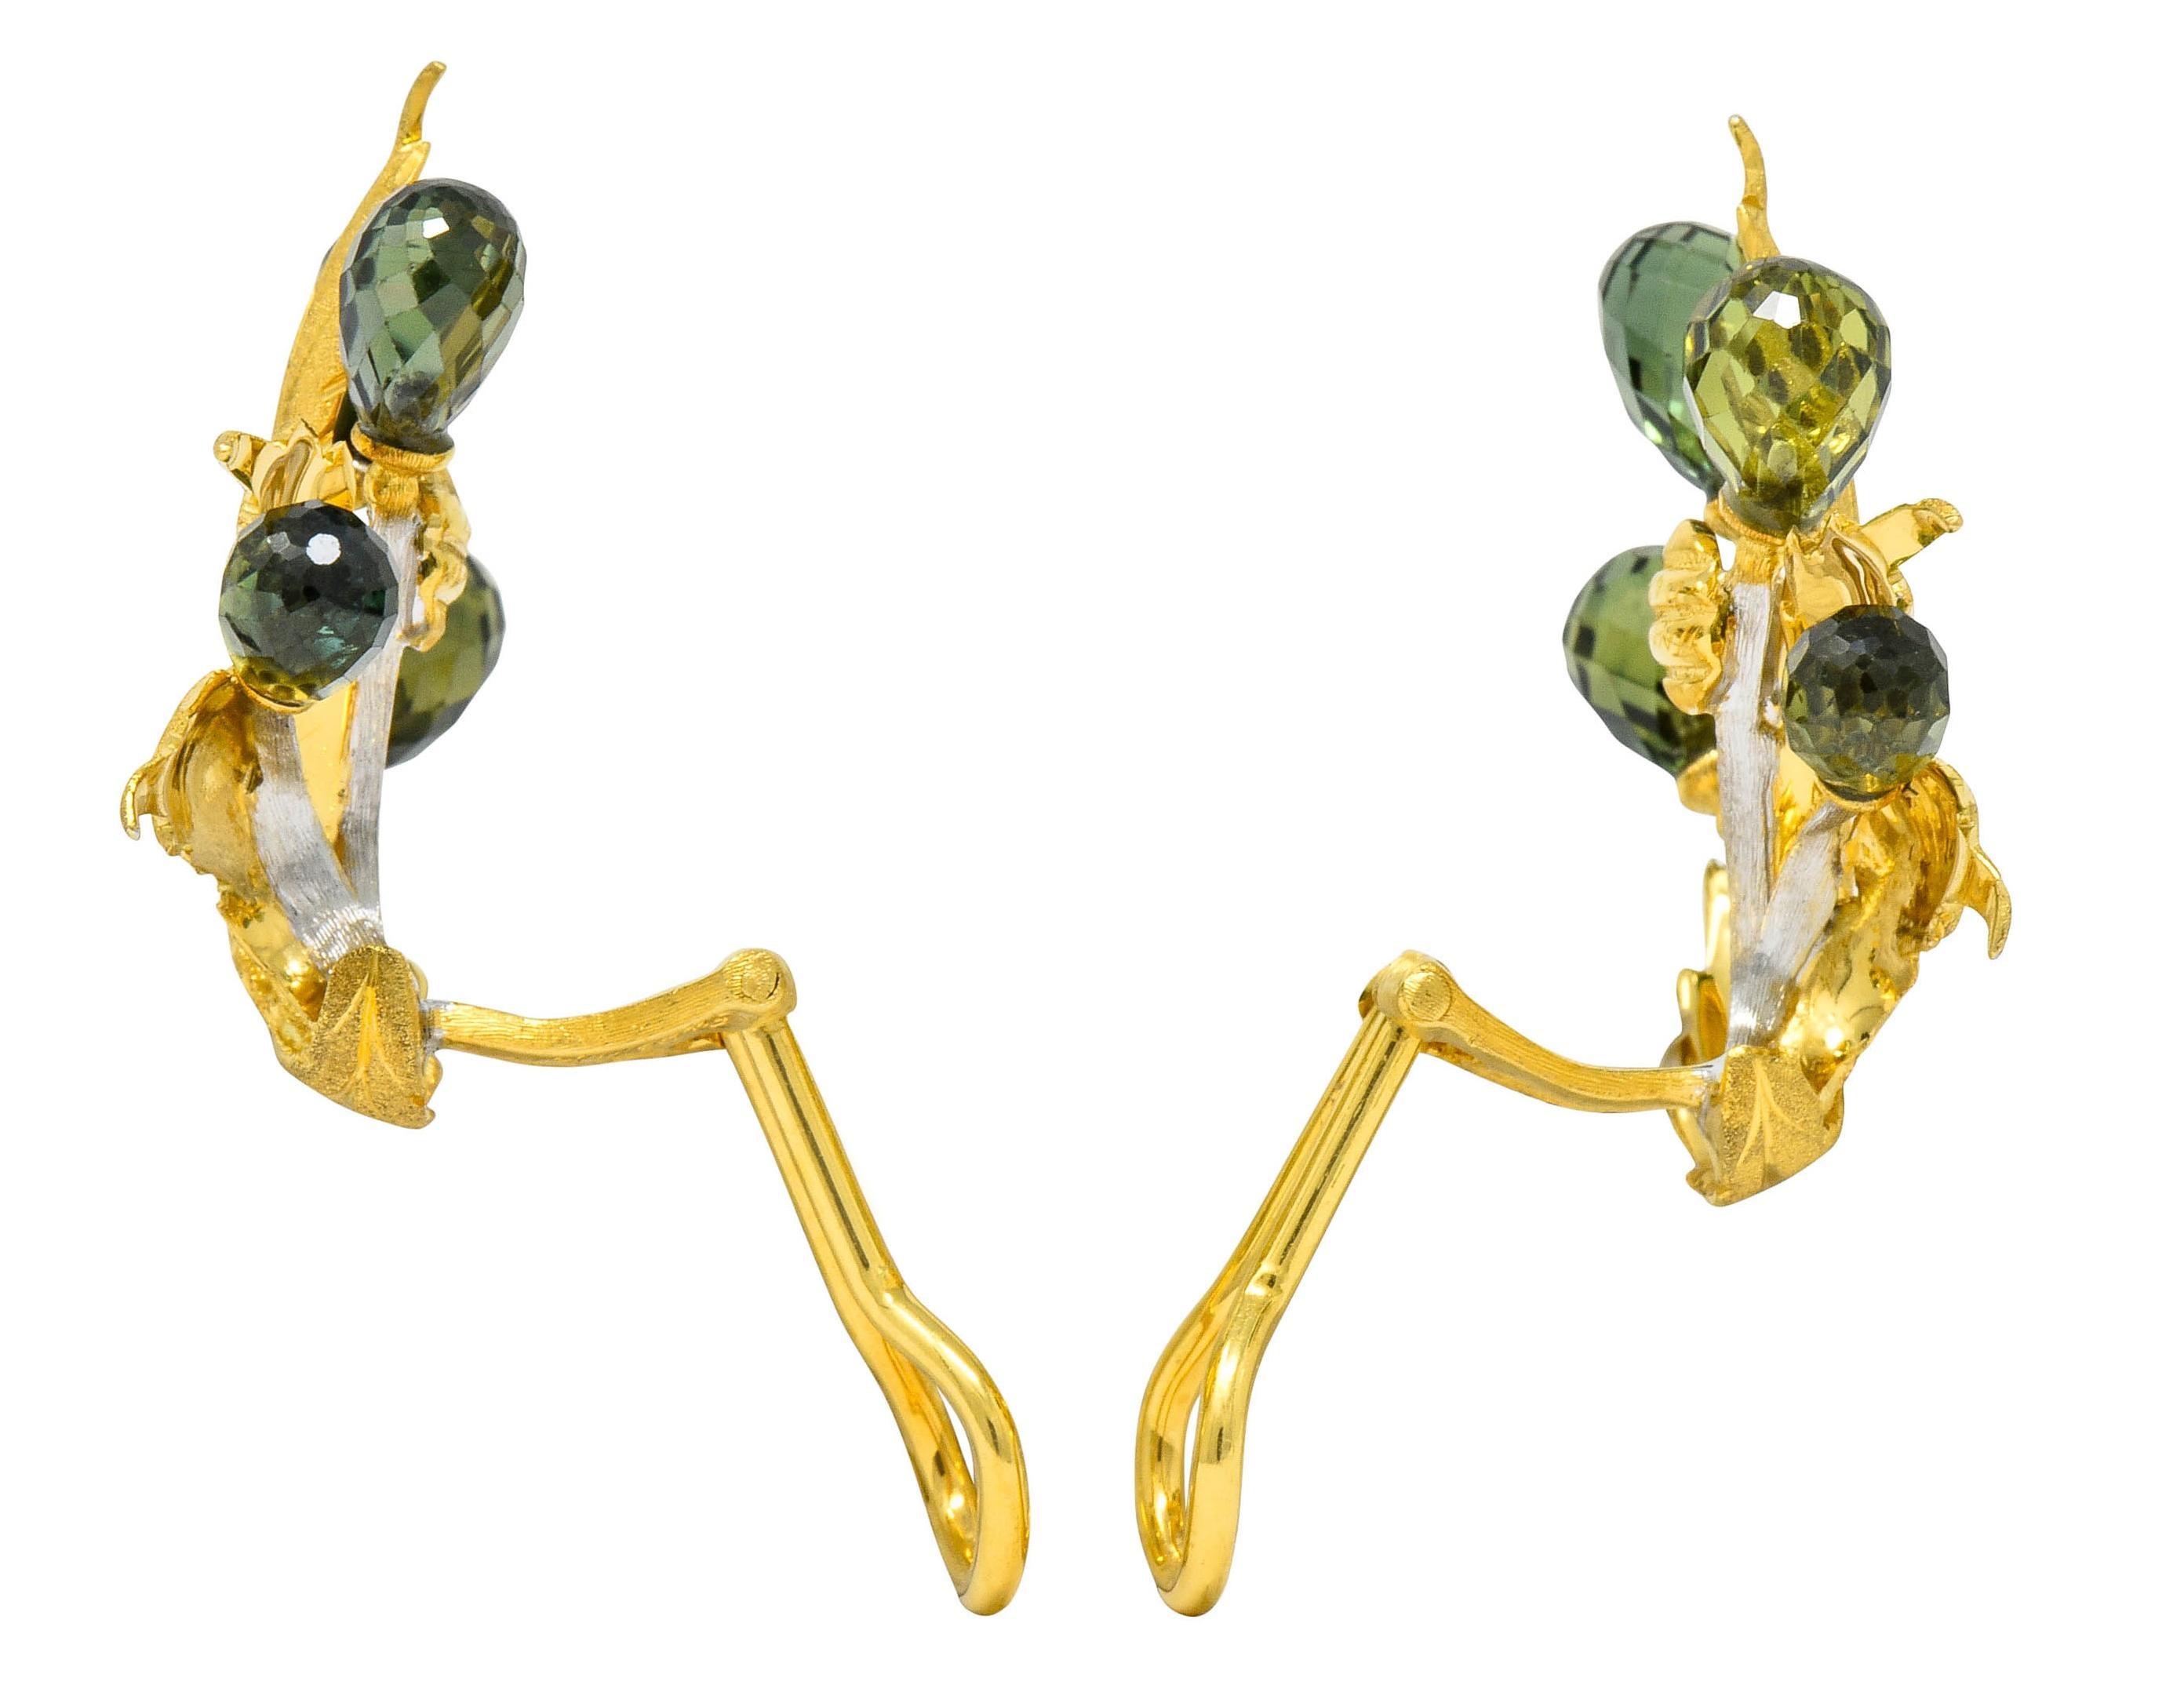 Earrings designed as sprouting foliate leaves featuring a matte gold finish with deeply engraved veining

With white gold vines topped by briolette cut sapphire, transparent medium-dark bluish-green to medium-light yellowish-green

Completed by